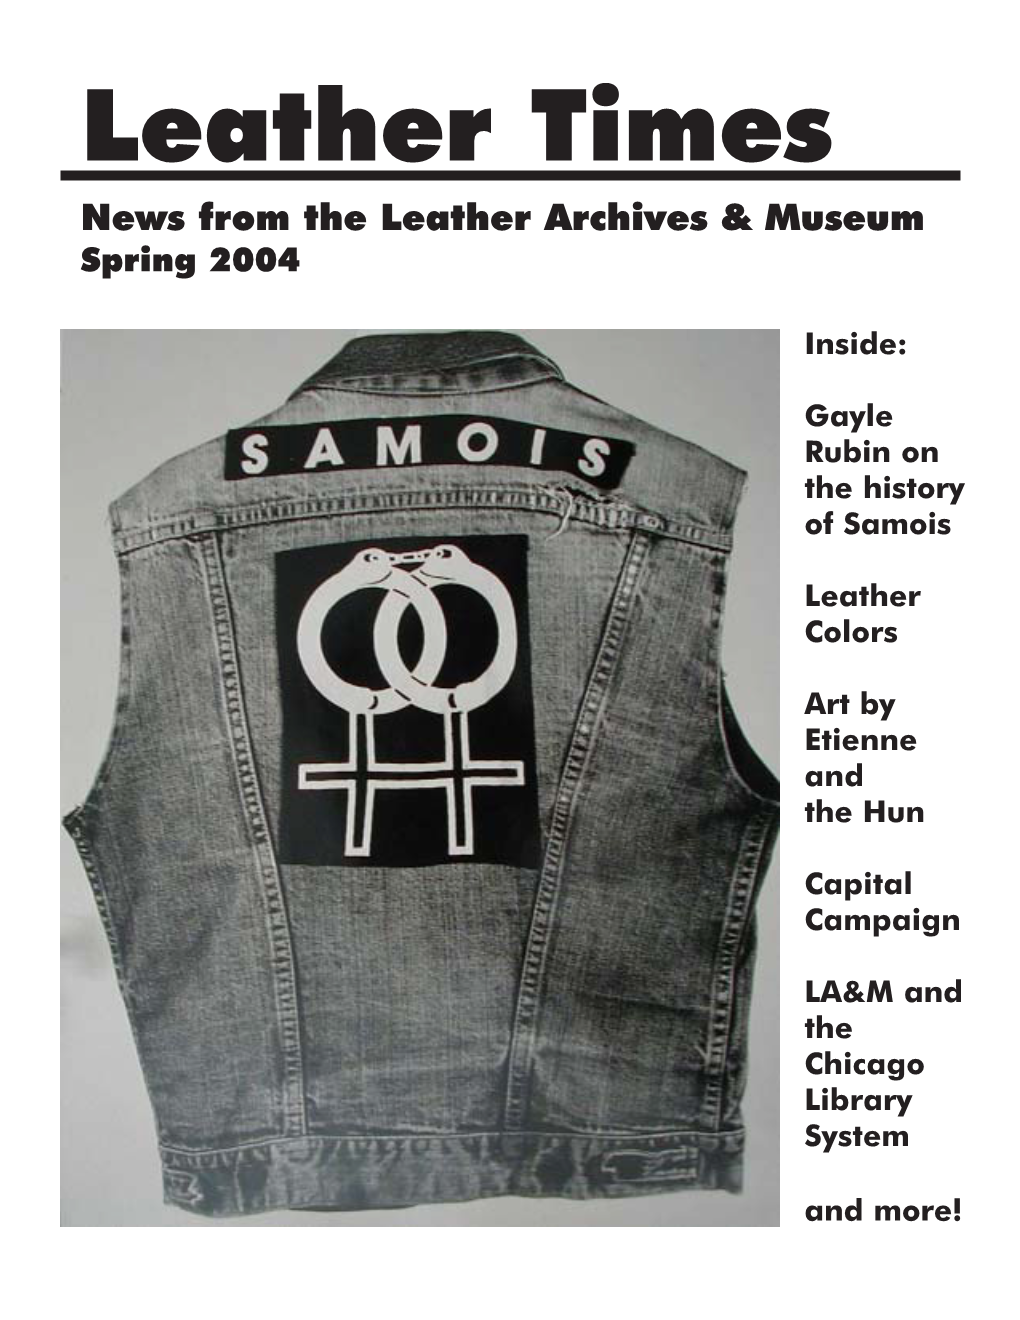 Leather Times News from the Leather Archives & Museum Spring 2004